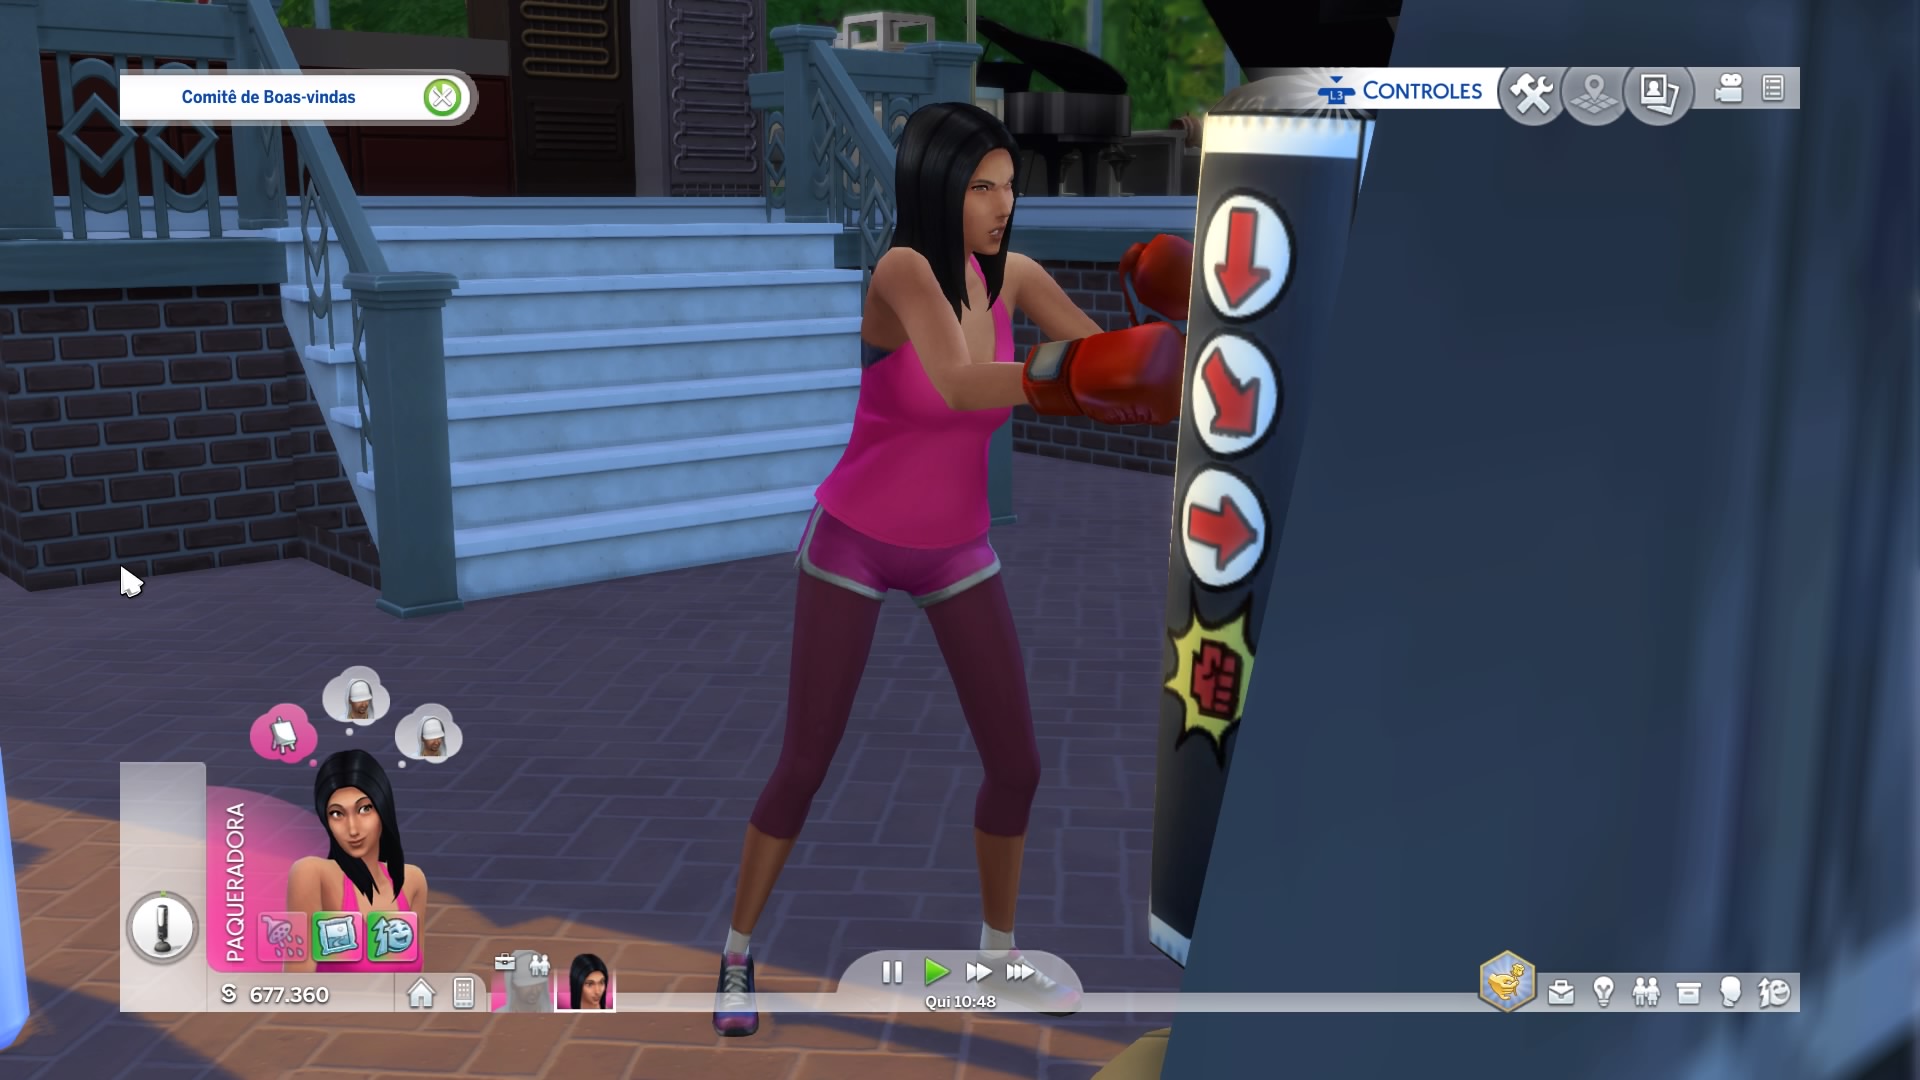 The Sims 4: Vale a Pena?